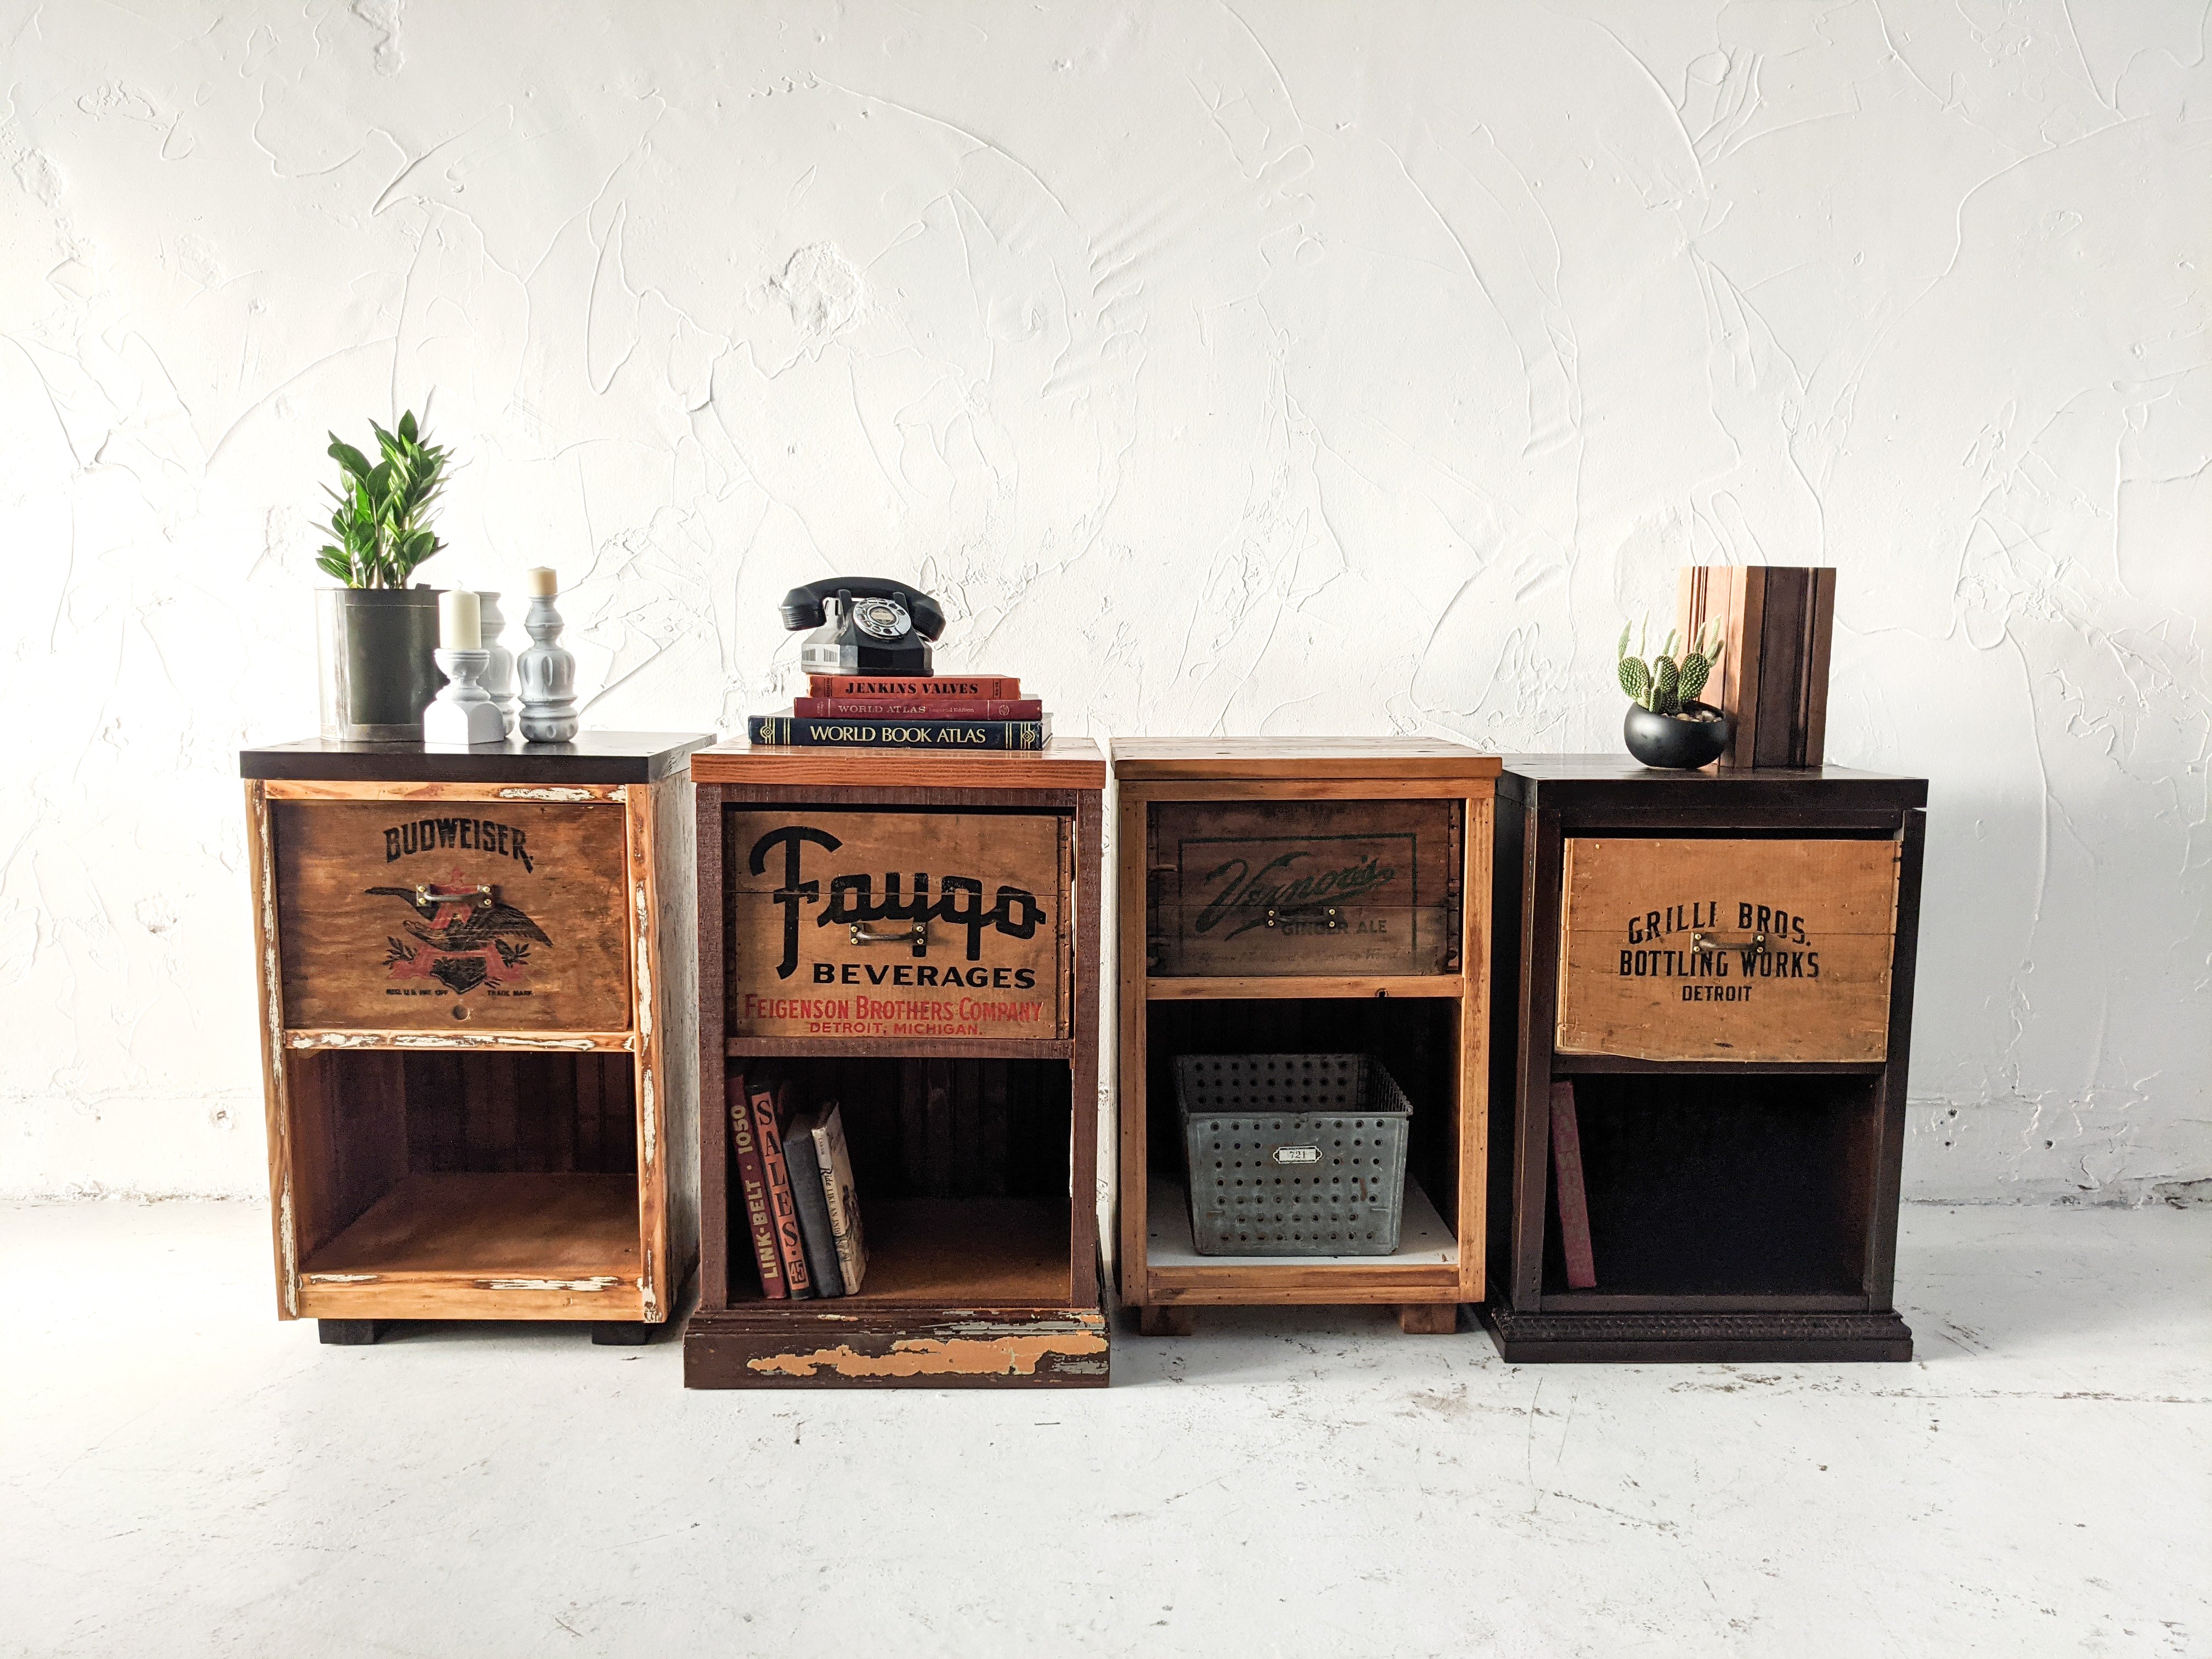 Styled set of four crate end tables in our collection.